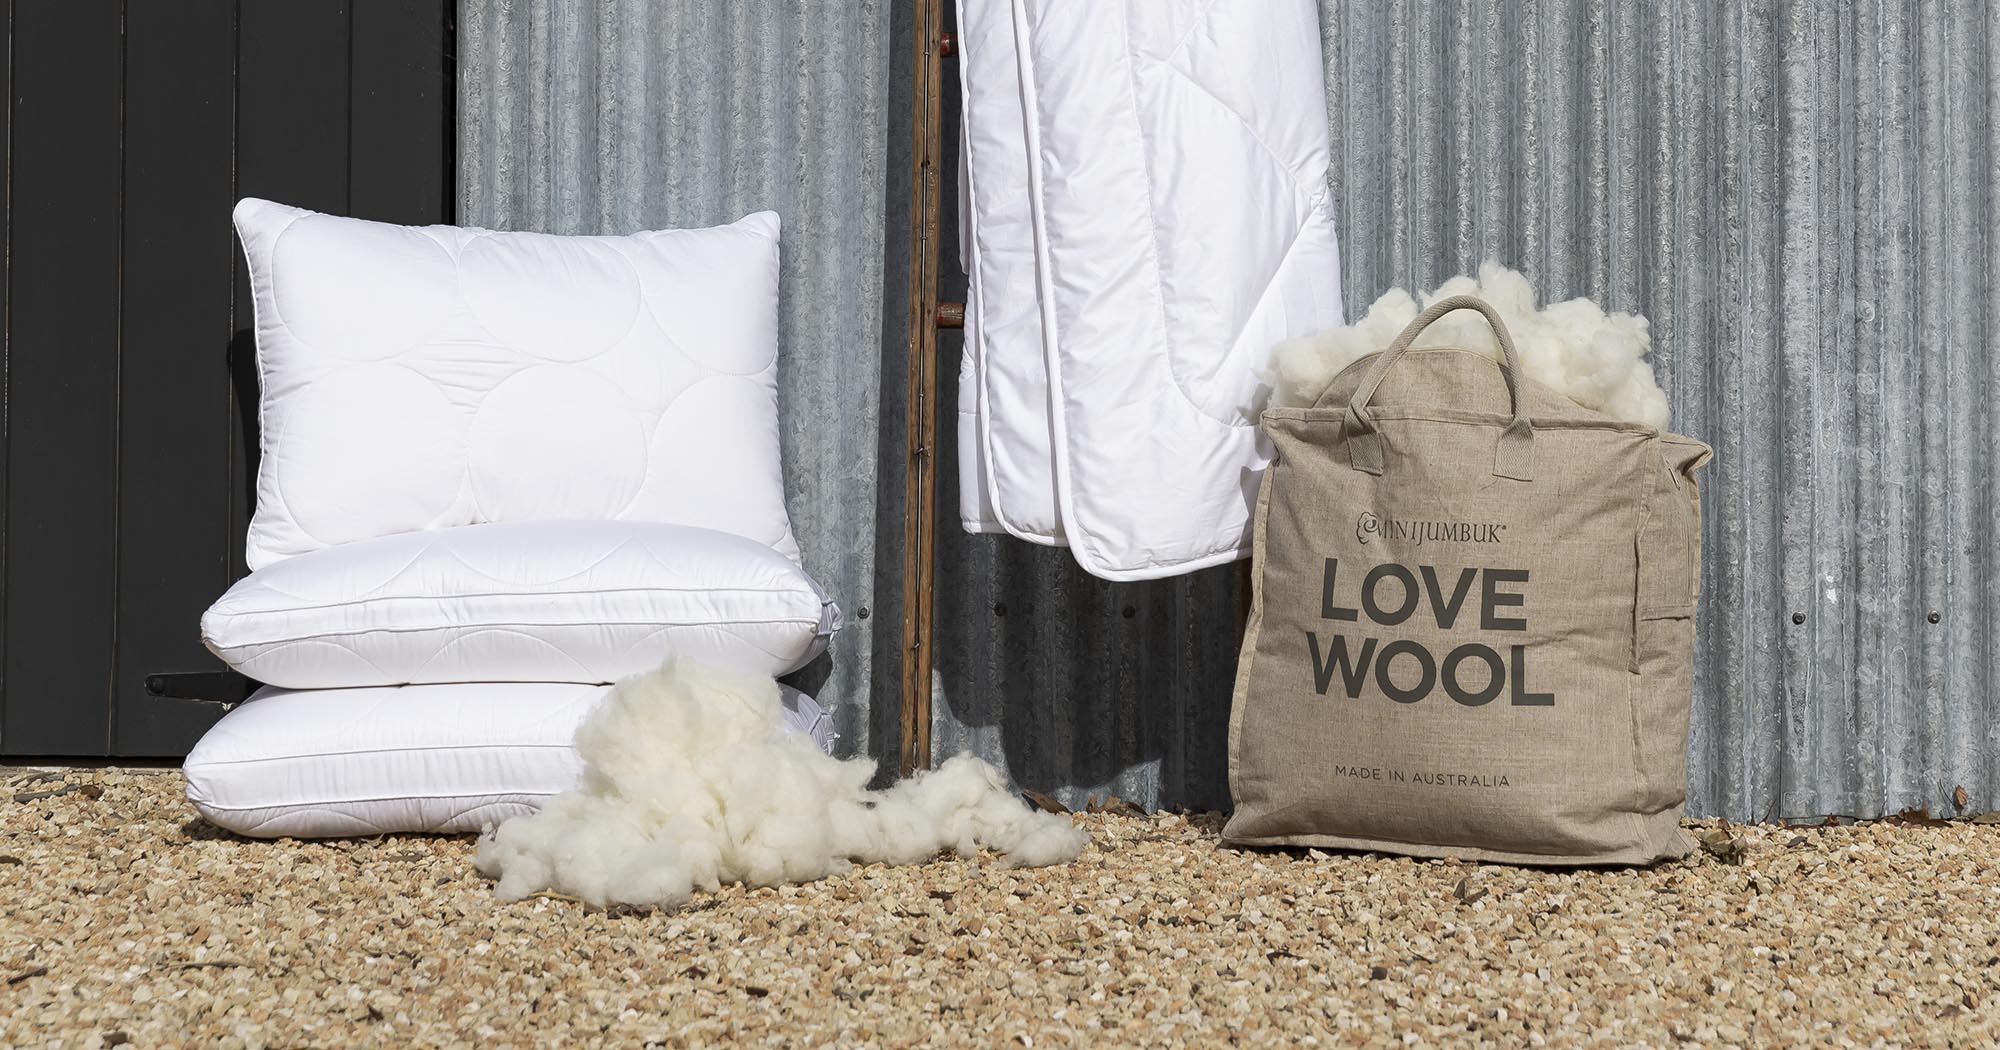 Why Wool Makes Sense for the Environment